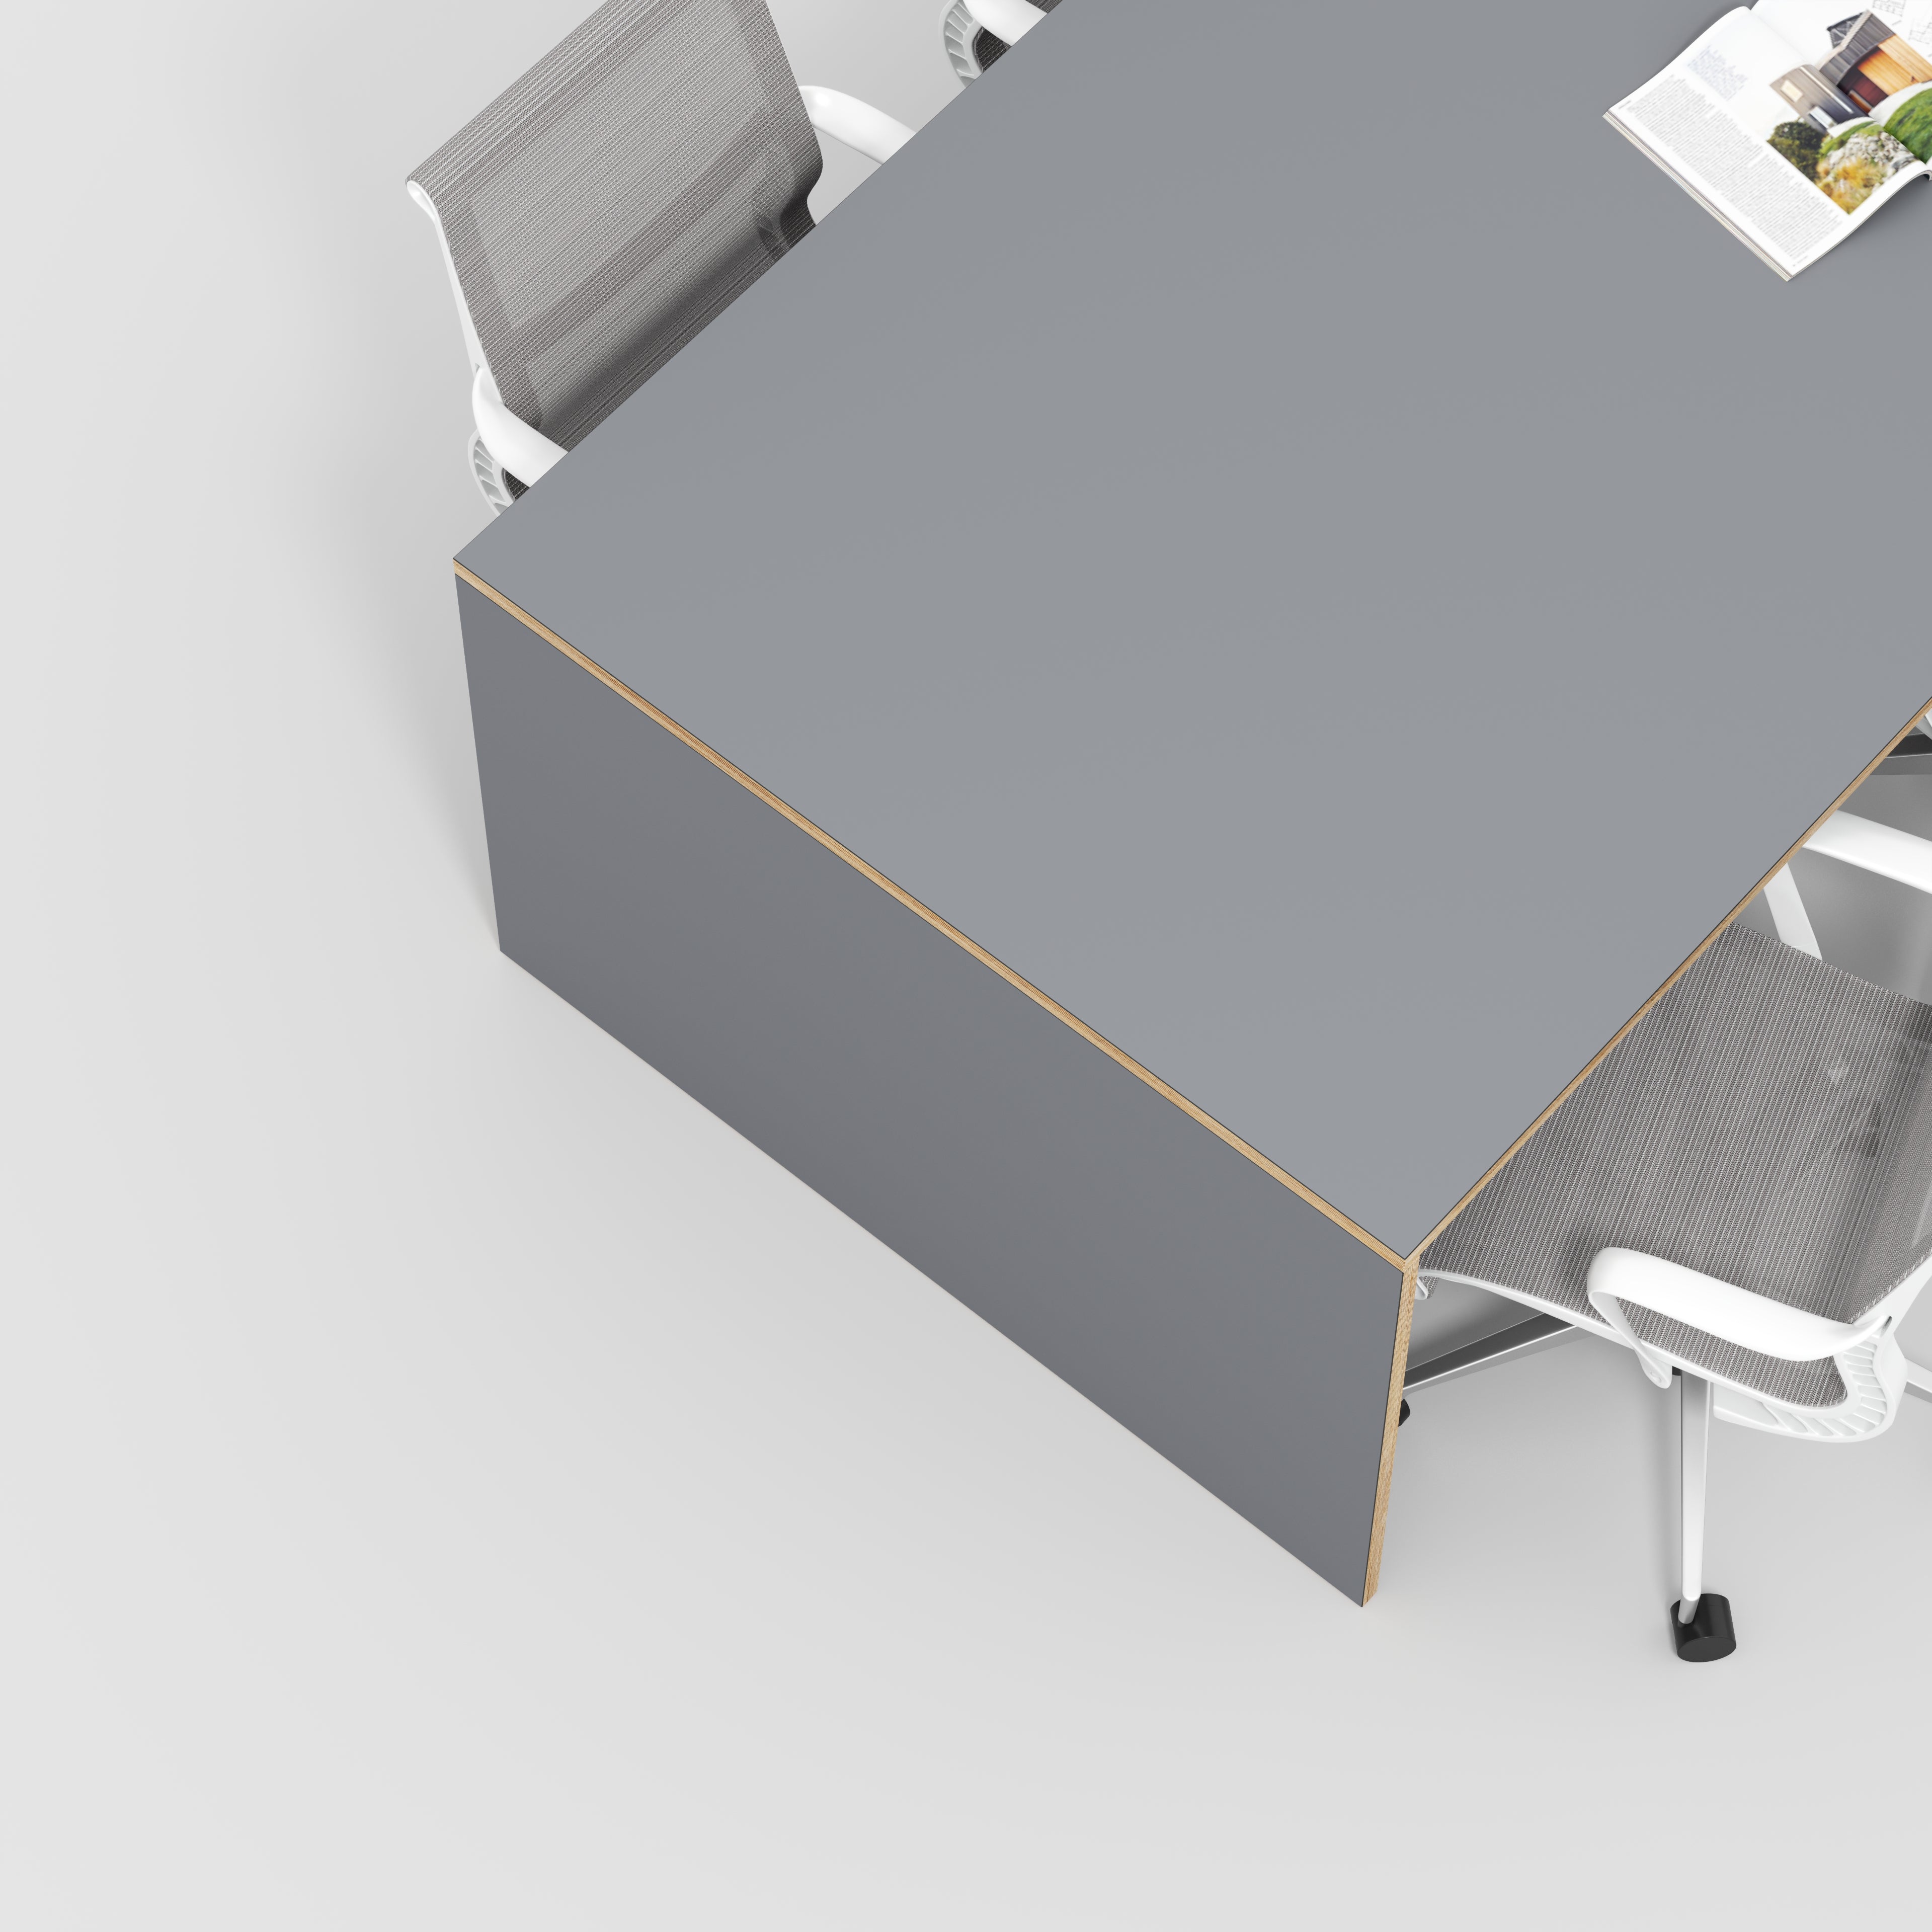 Table with Solid Sides - Formica Tornado Grey - 5600(w) x 1000(d) x 750(h)